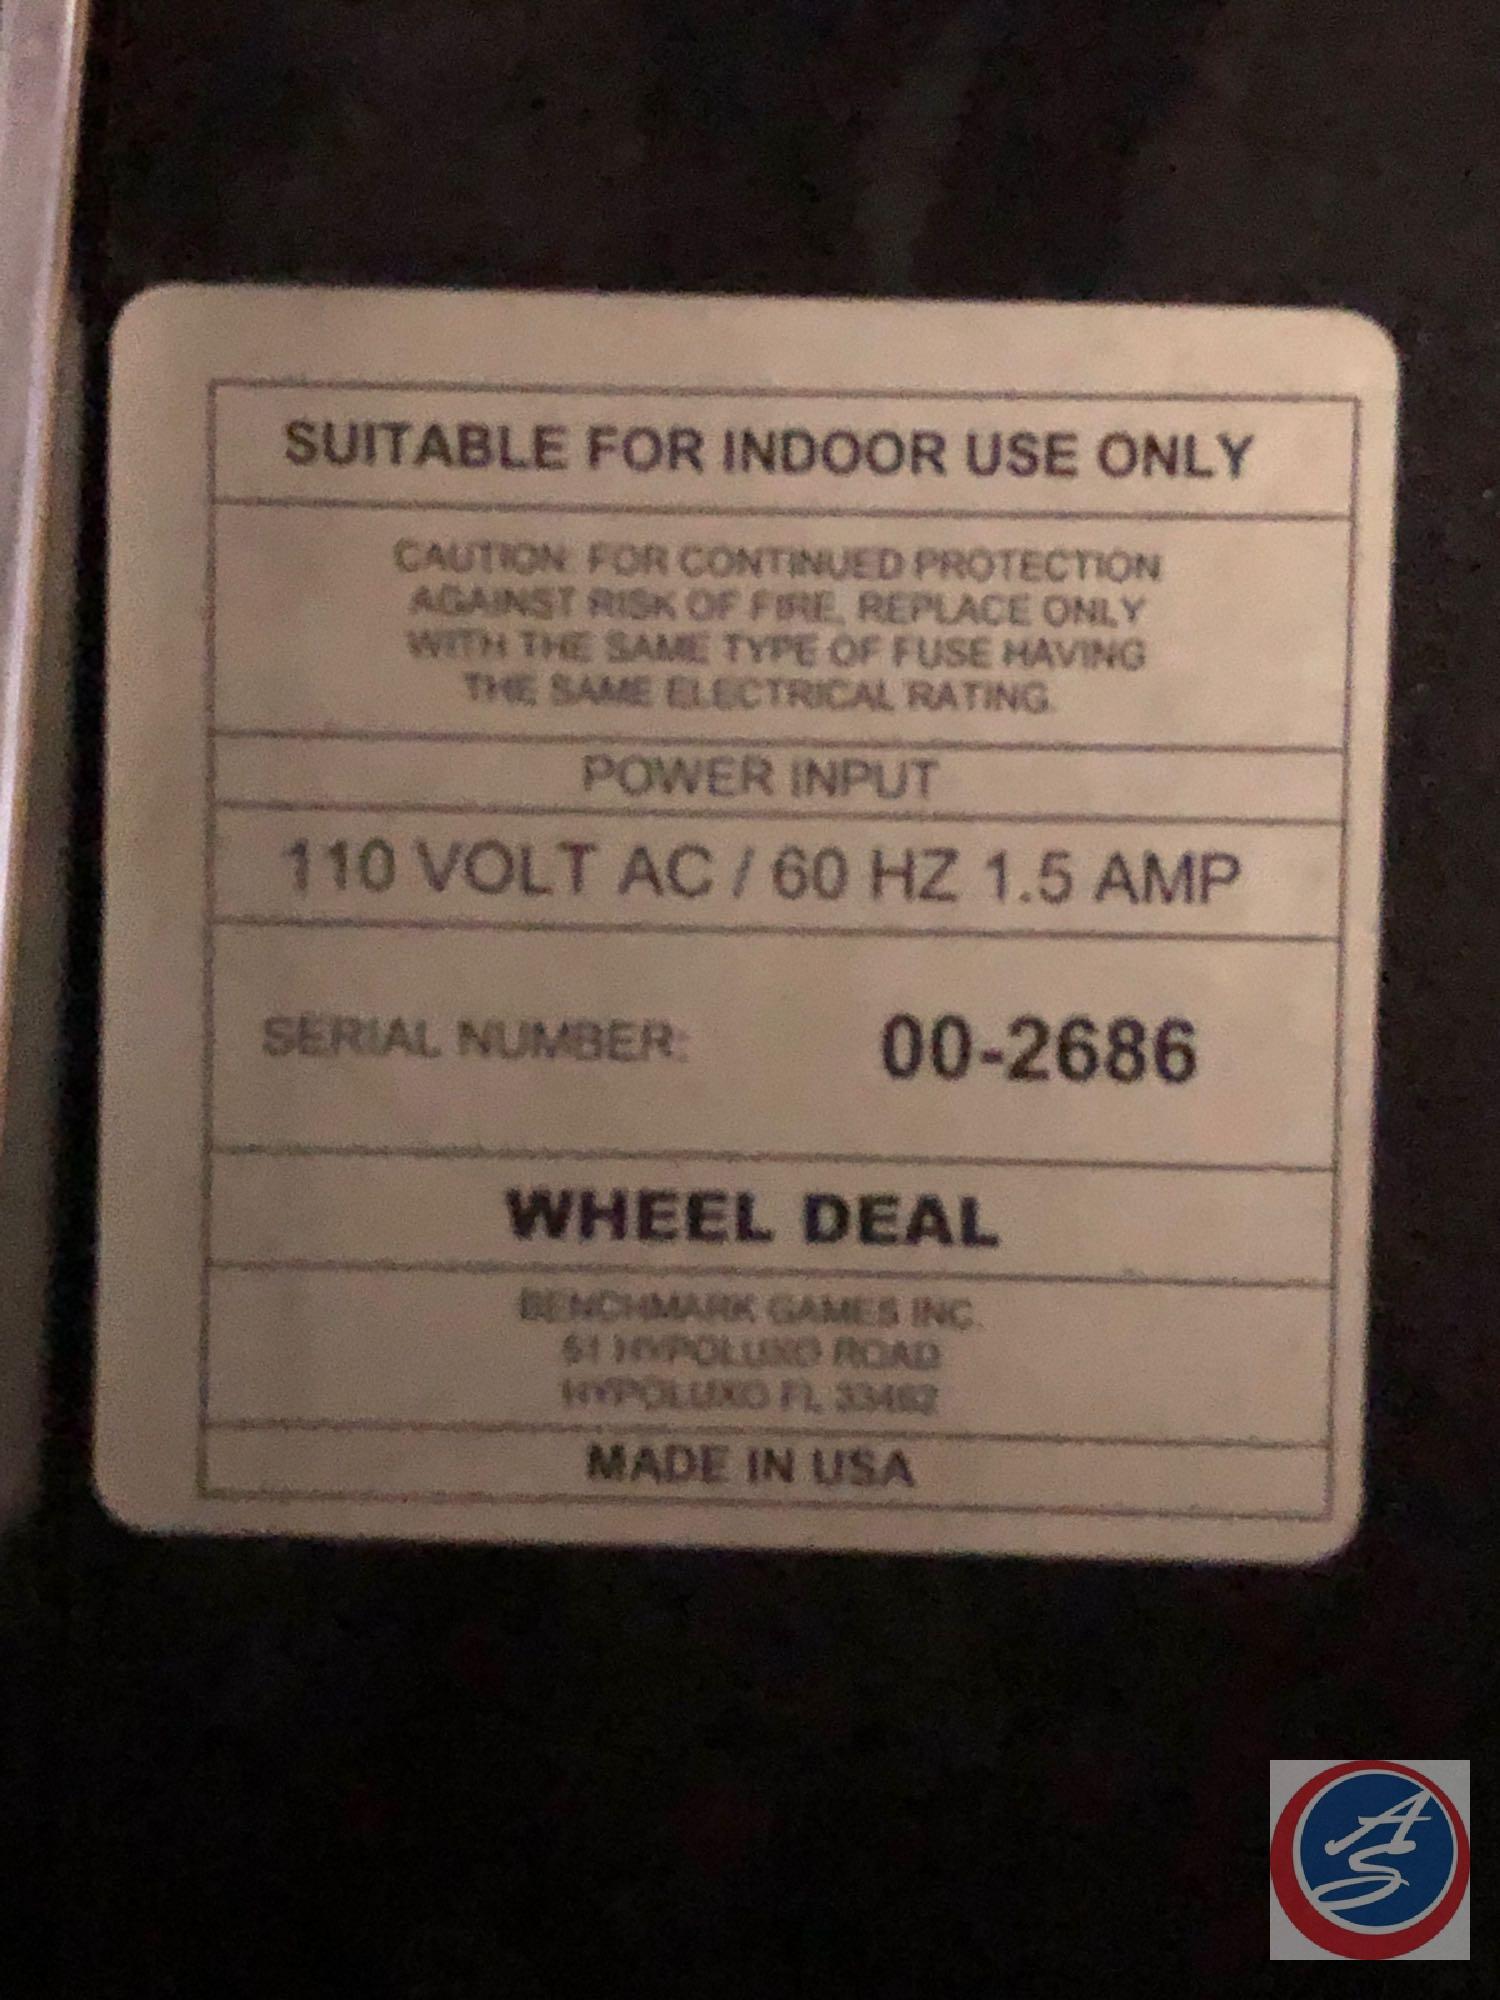 {{2X$BID}} Wheel Deal Game Systems Serial No. 00-2682 [[CONDITION UNKNOWN}}